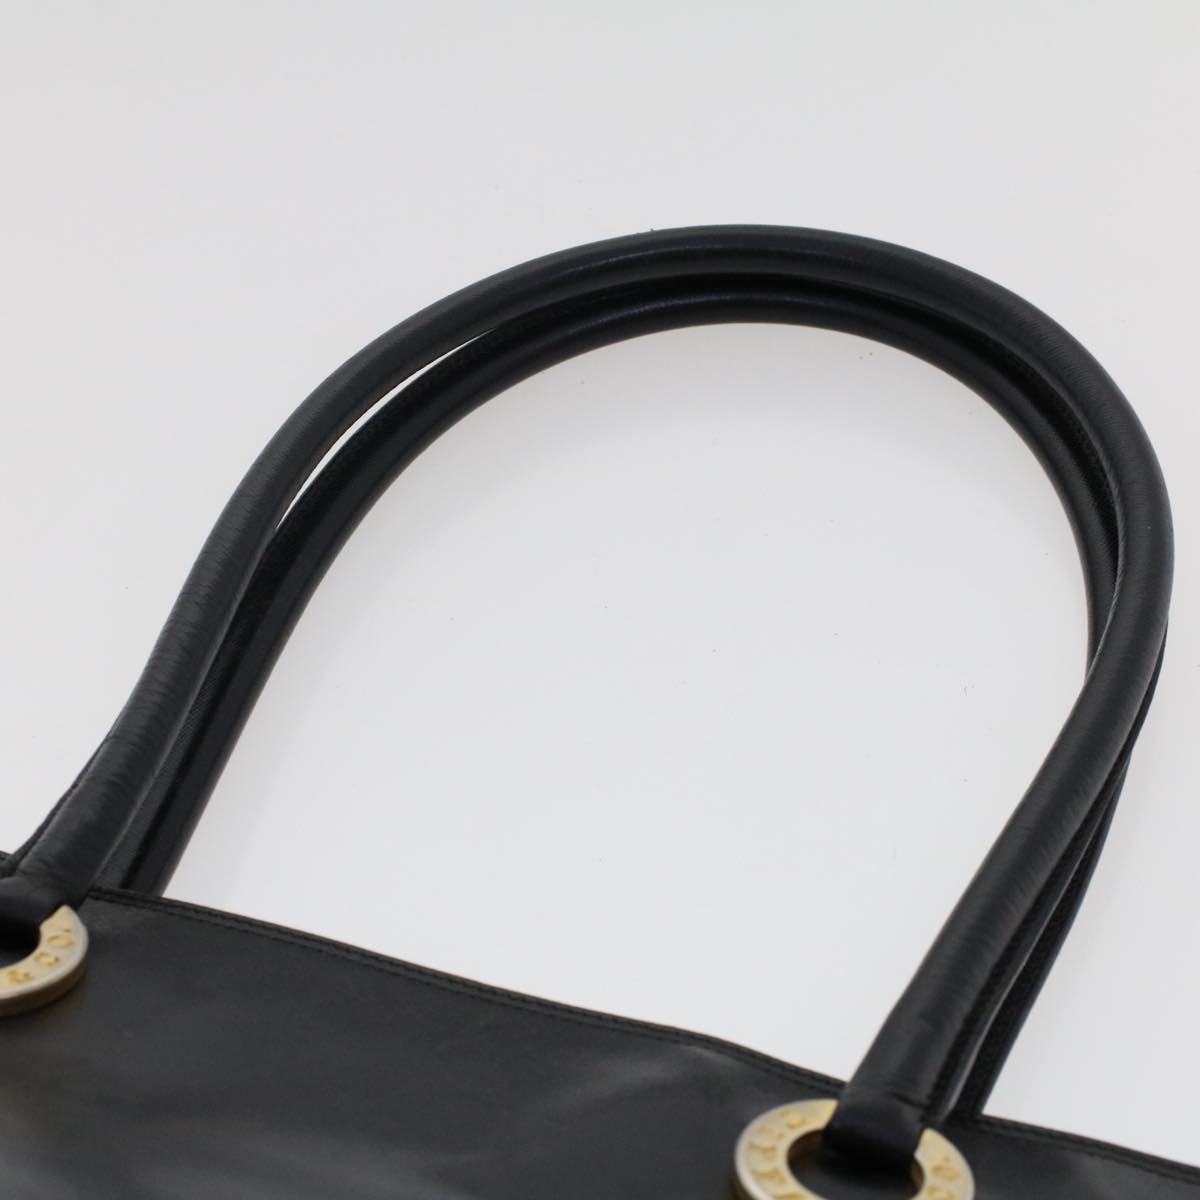 TIFFANY&Co. Tote Bag Leather Black Auth bs6458